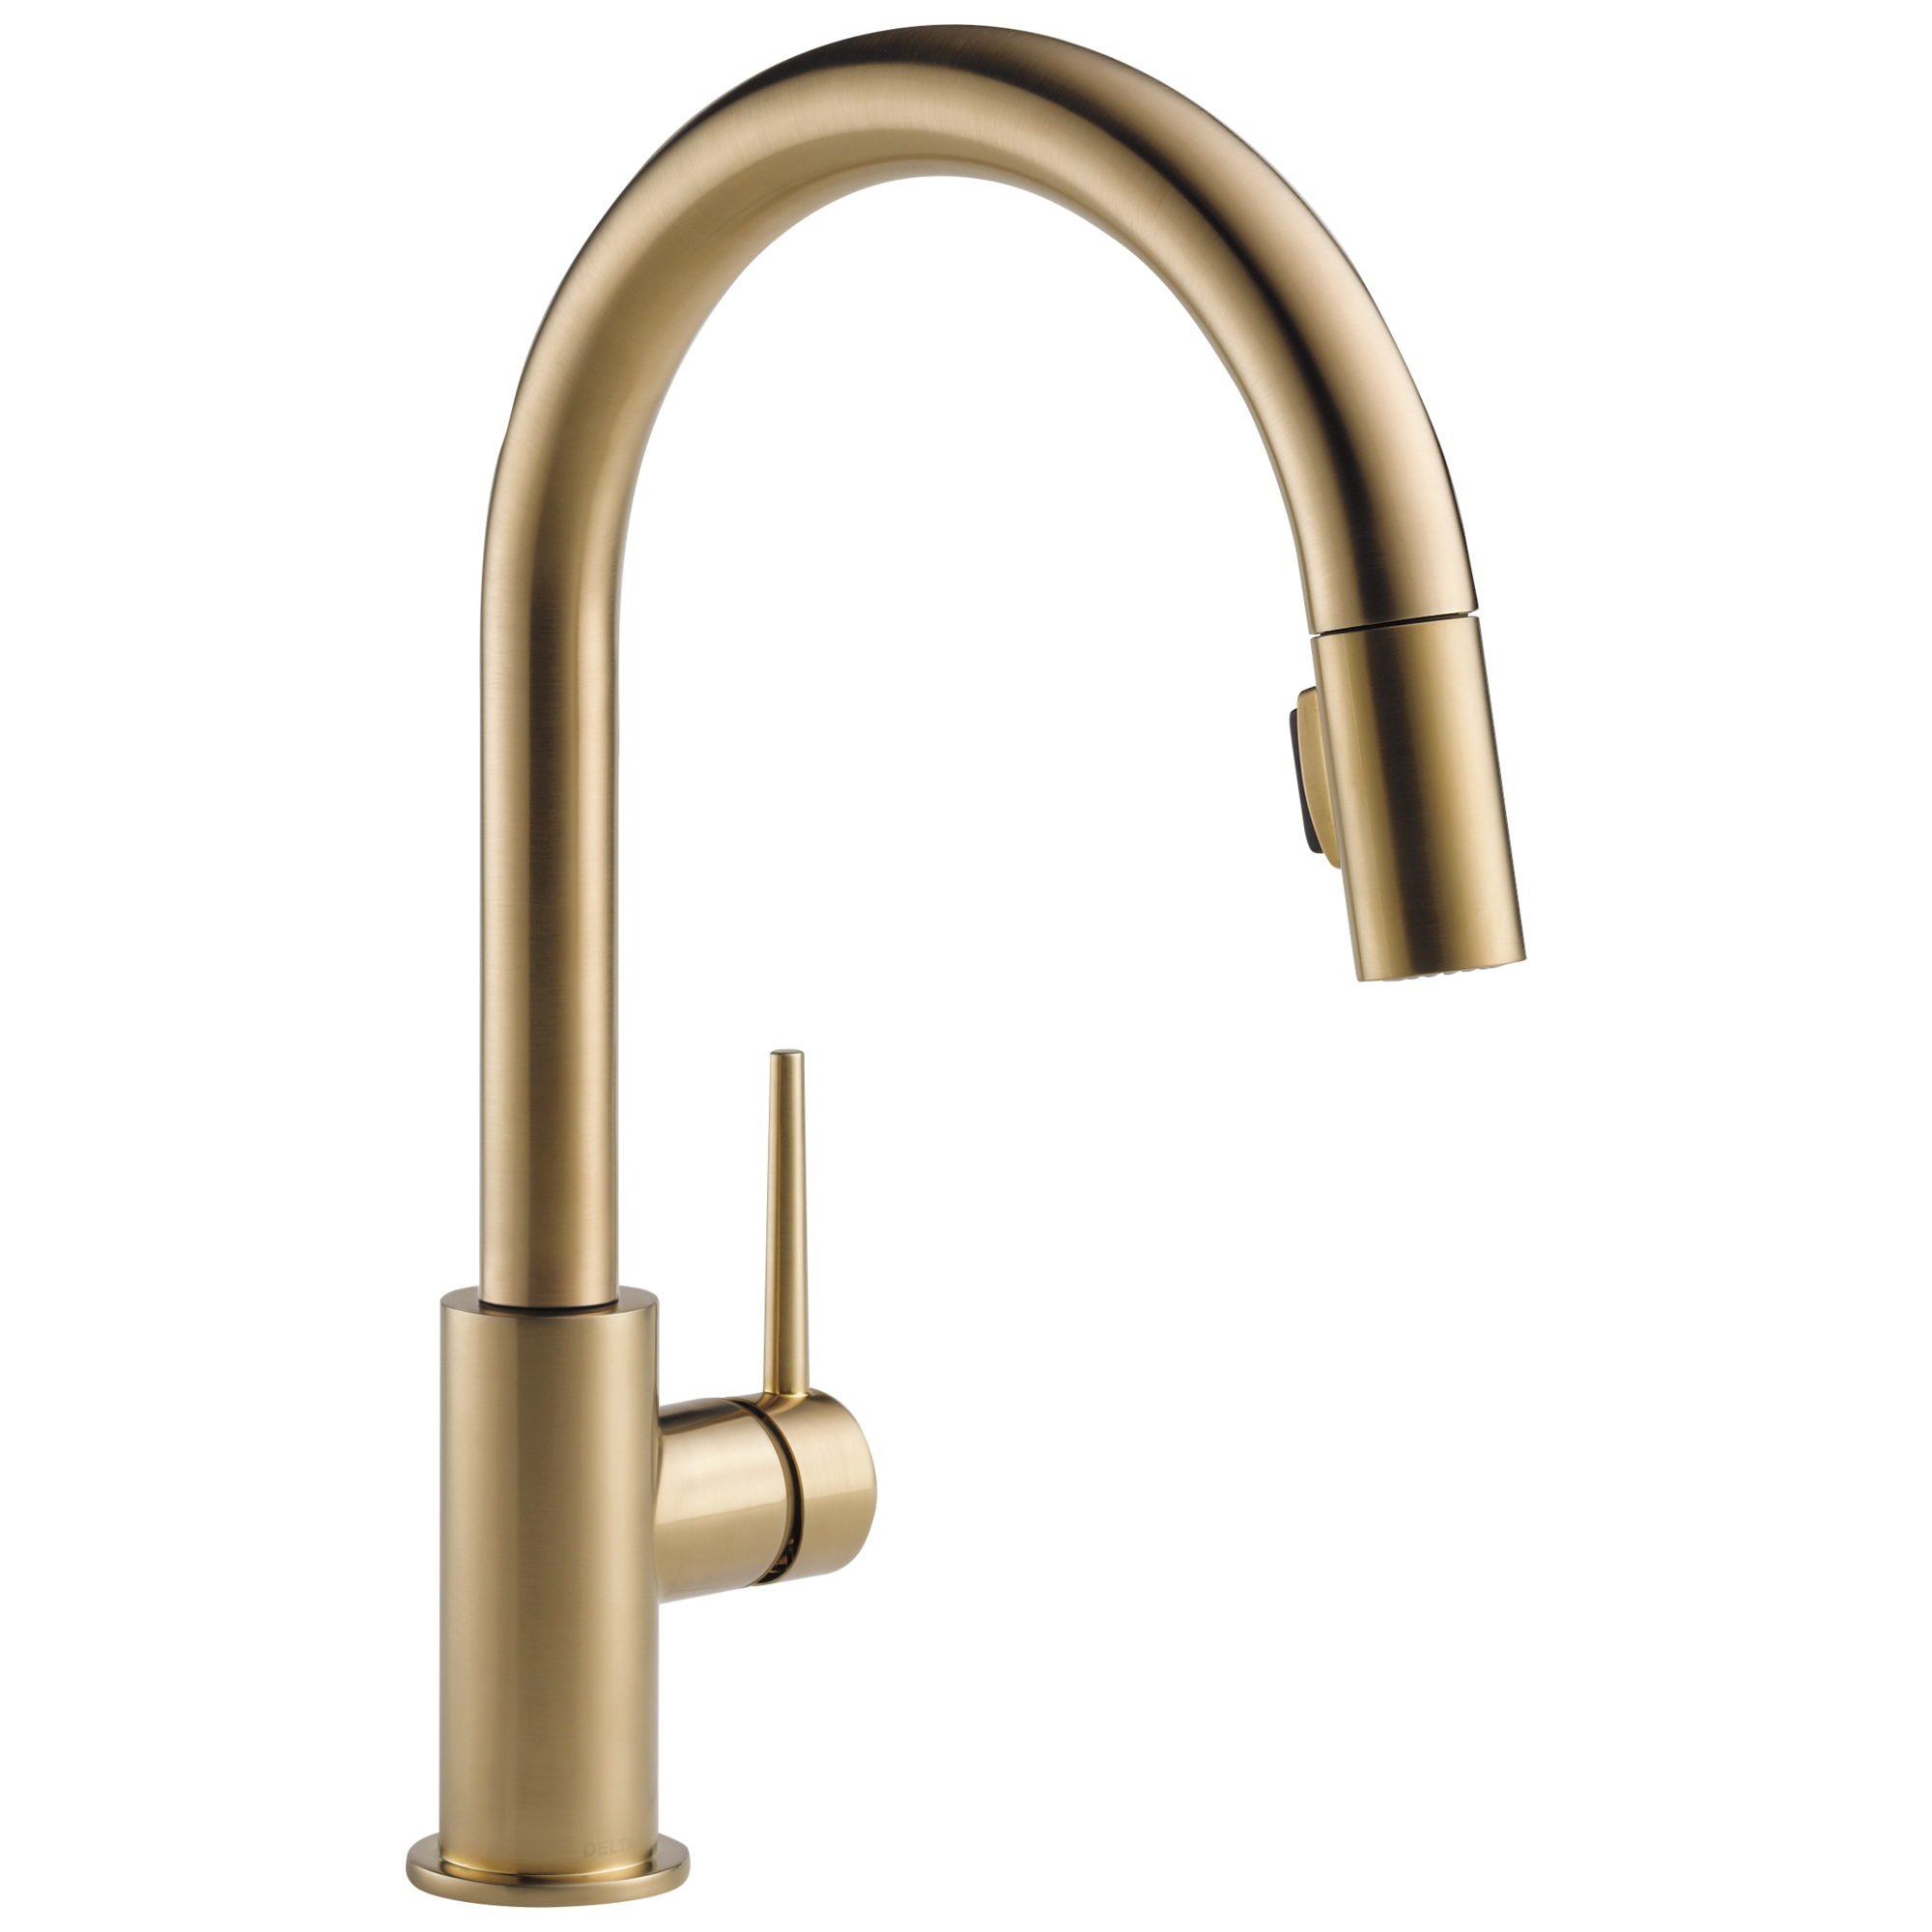 Delta Trinsic® Single Handle Pull-Down Kitchen Faucet - image 1 of 10